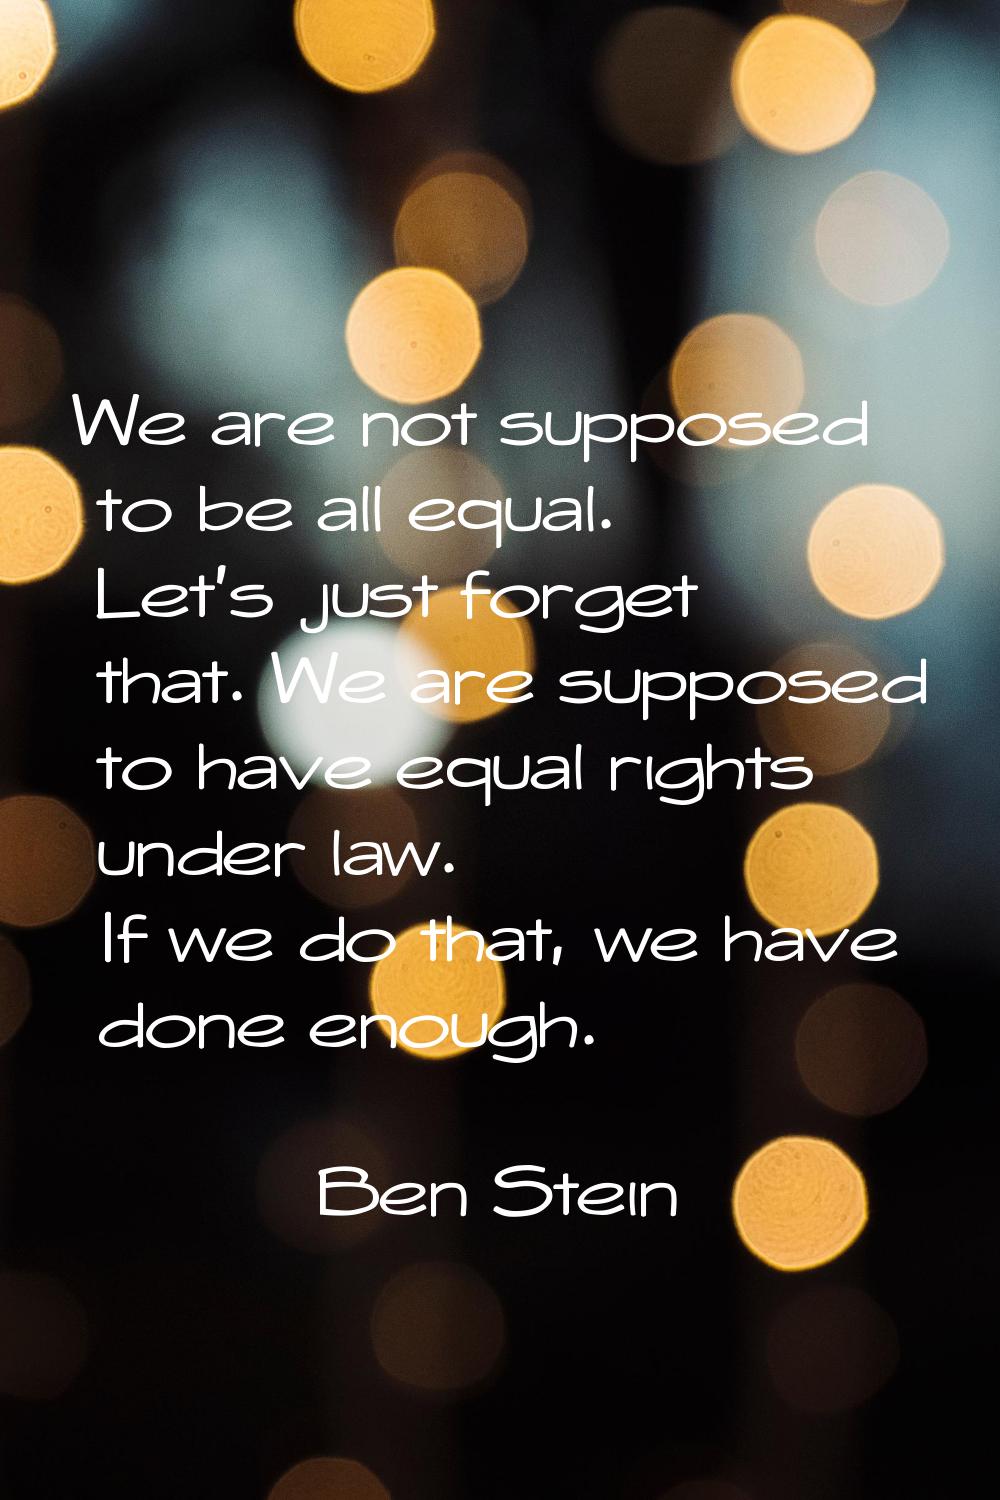 We are not supposed to be all equal. Let's just forget that. We are supposed to have equal rights u